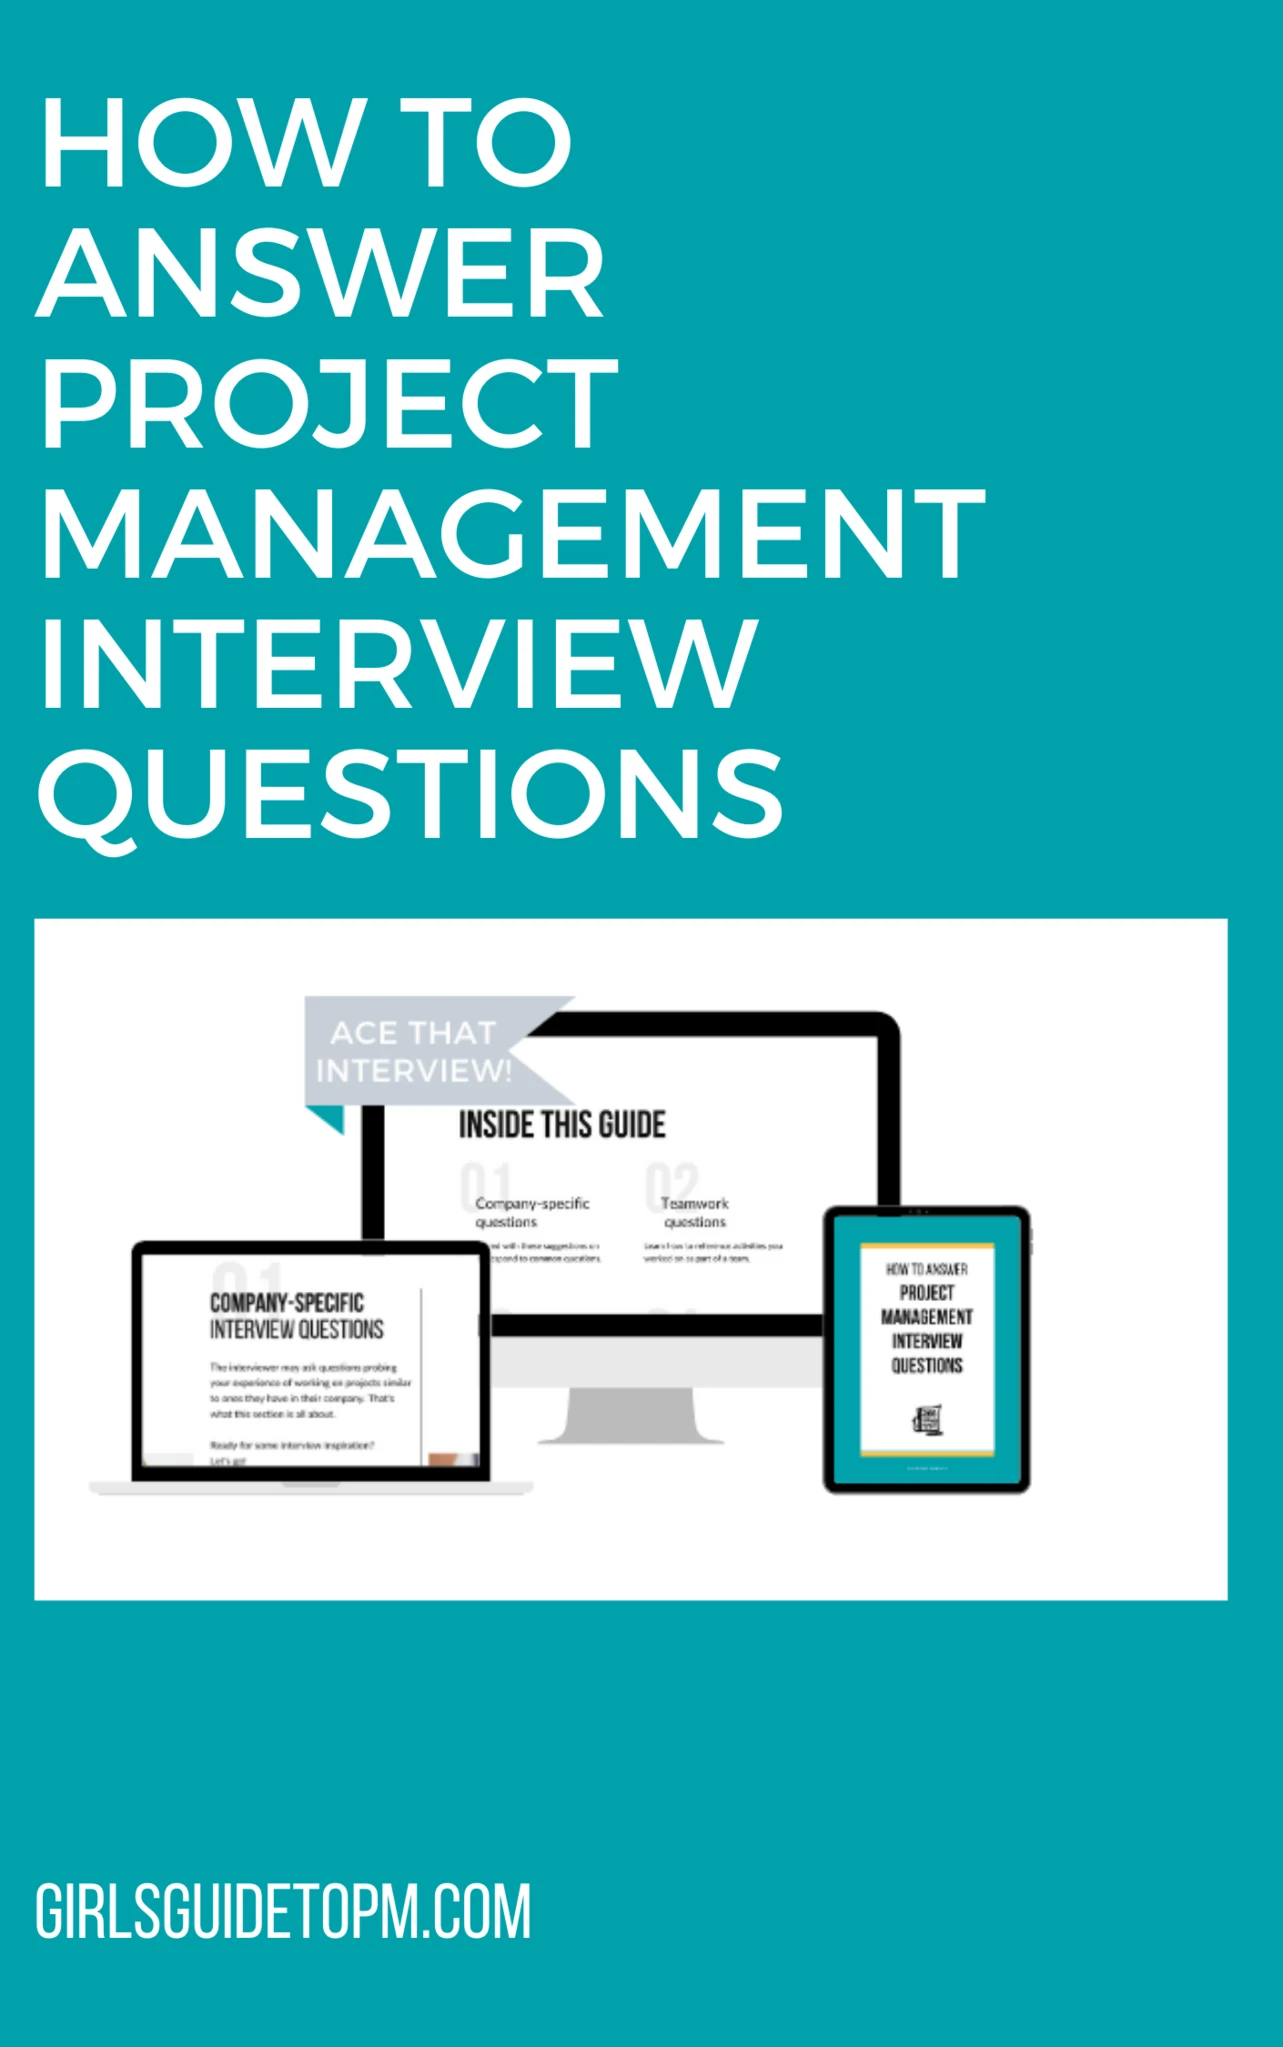 How to Prepare for a Project Management Interview